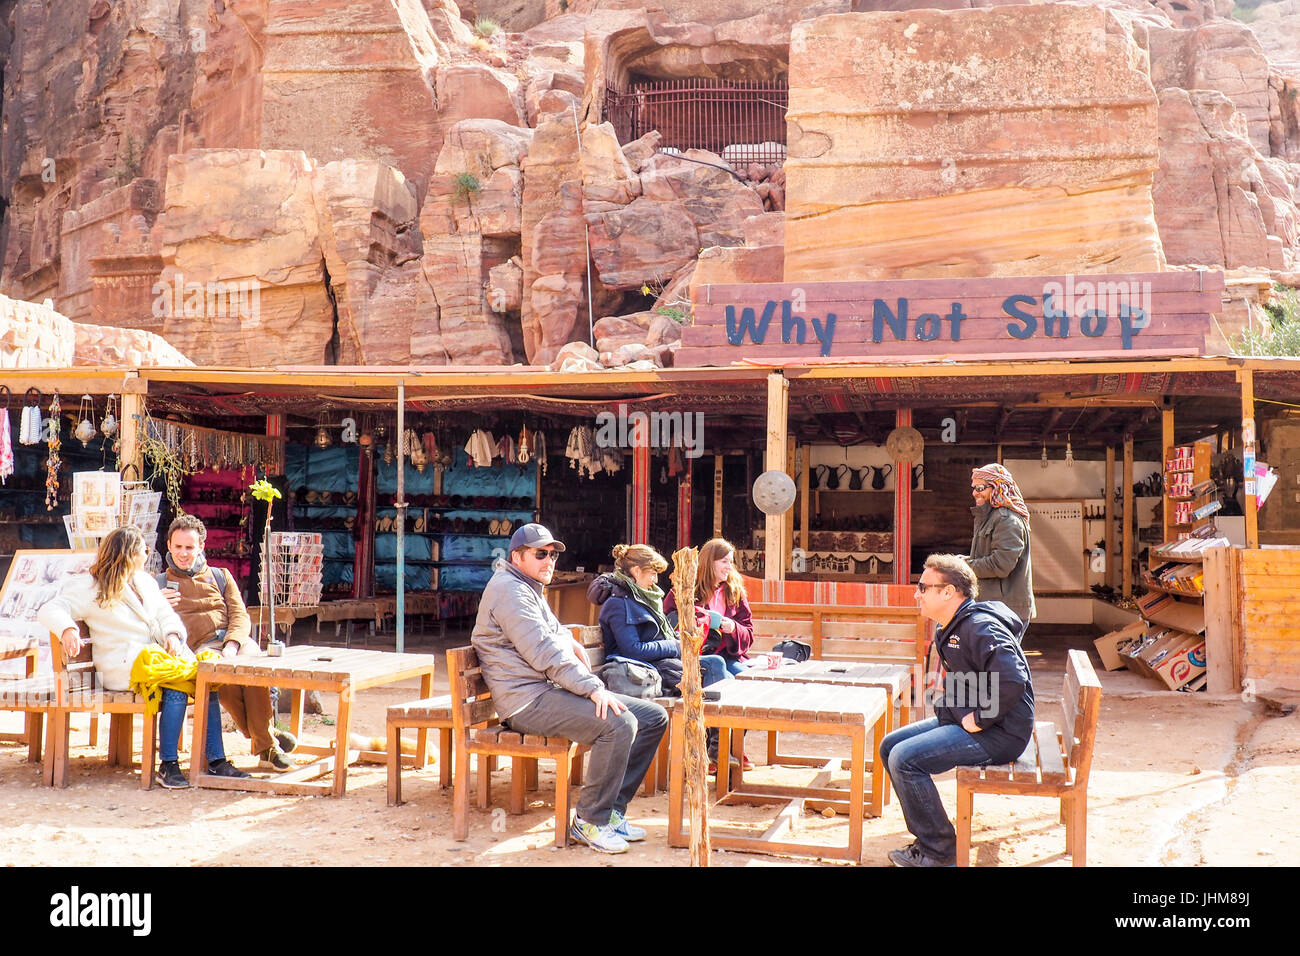 Tourists resting and having refreshments in an al fresco area of a restaurant in Petra, Jordan. Stock Photo